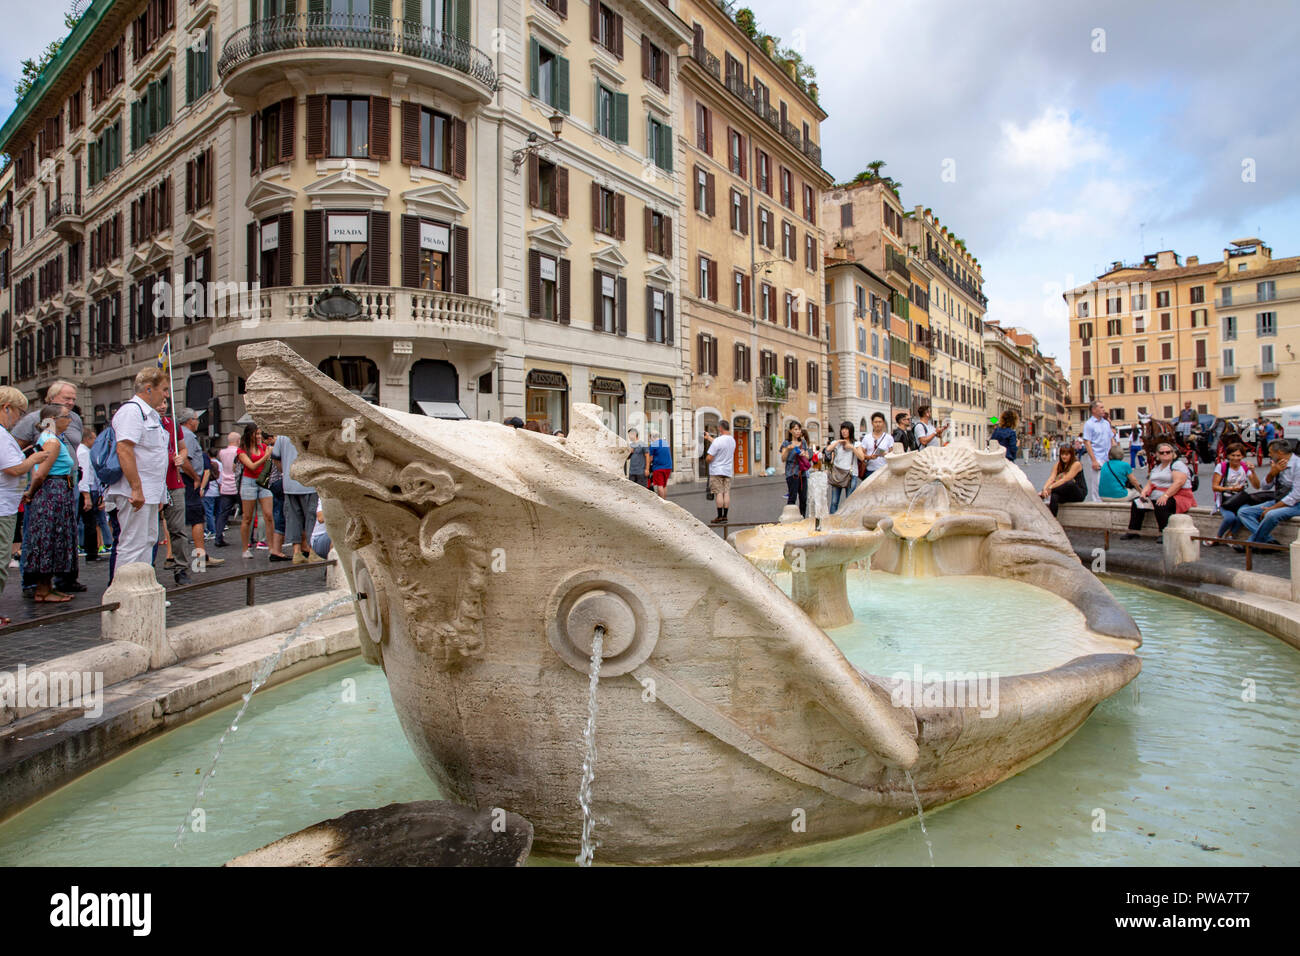 Fontana della Barcaccia or Fountain of the boat in Piazza Di Spagna at the foot of the Spanish steps in Rome,Italy,Europe Stock Photo